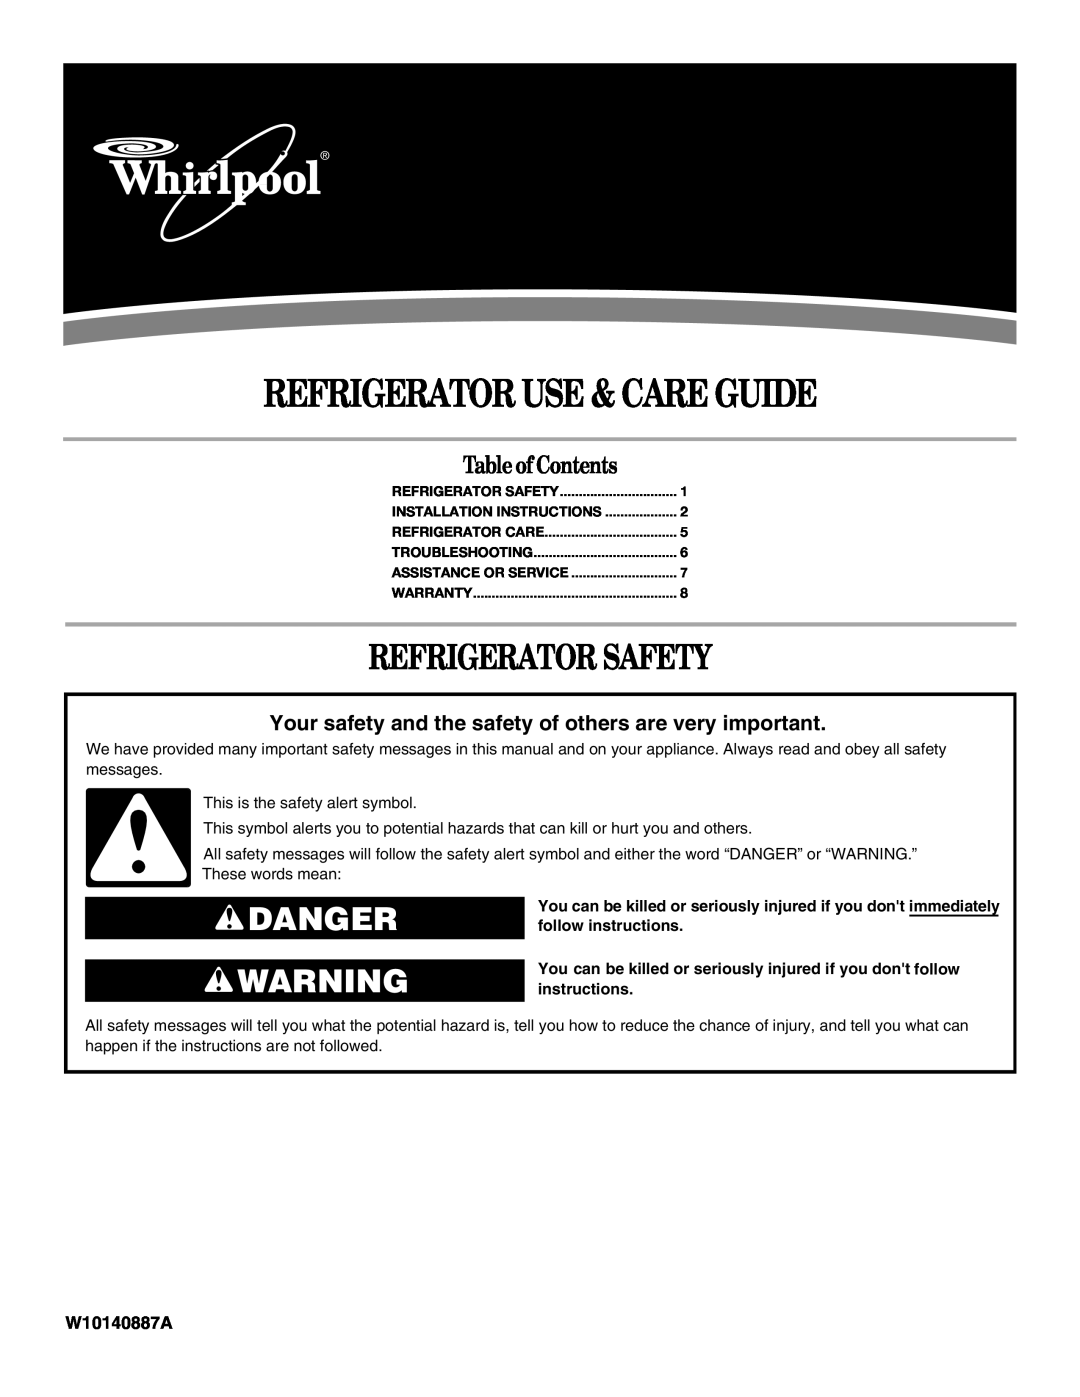 Whirlpool W10140887A installation instructions Refrigerator Safety, TableofContents, Refrigerator Use & Care Guide, Danger 